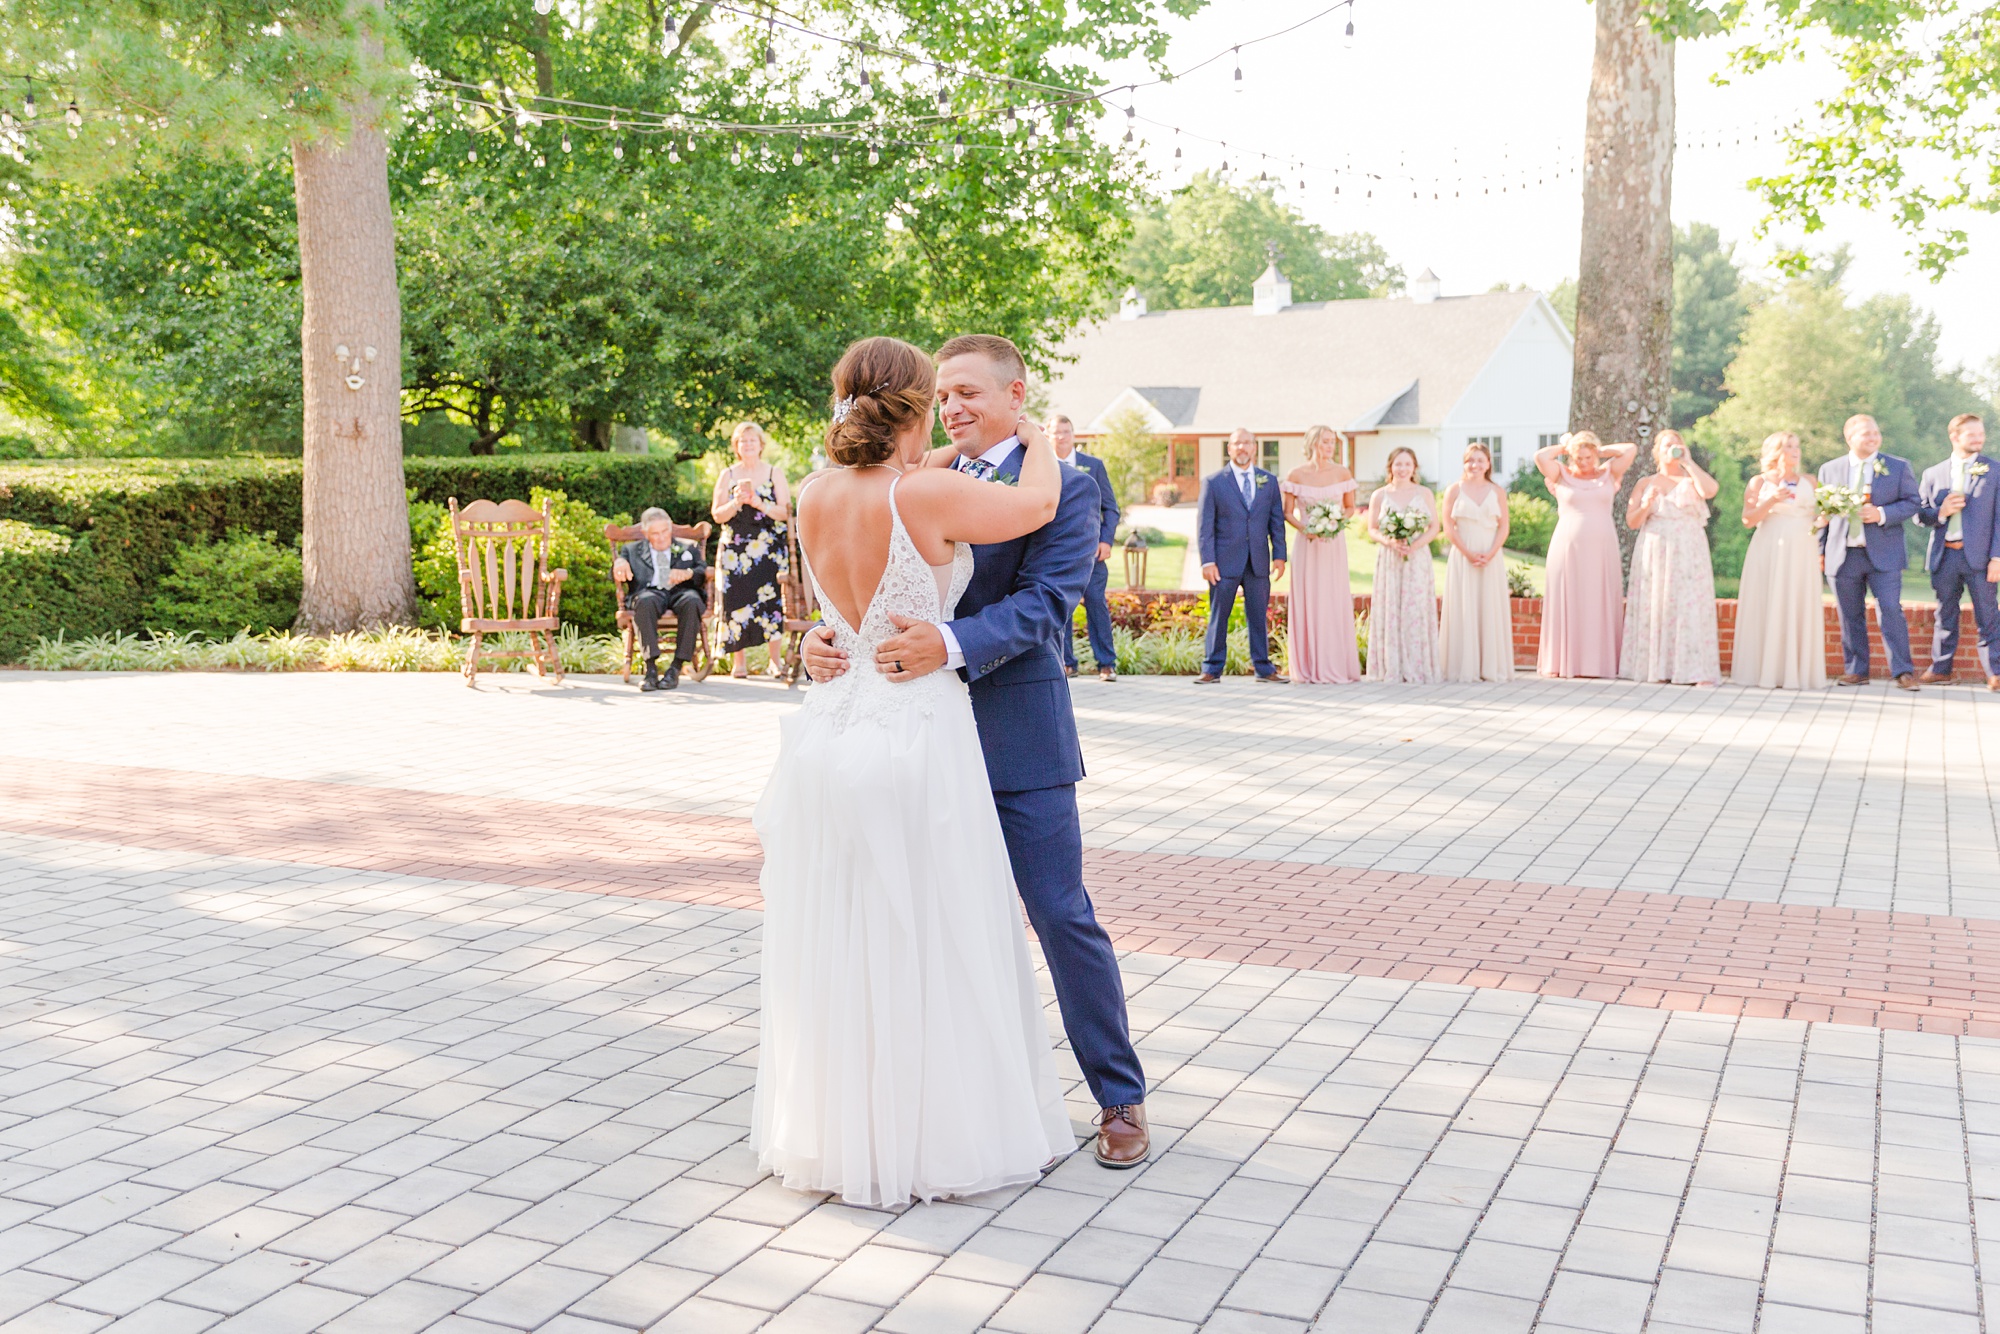 newlyweds dance on patio during Drumore Estate wedding reception